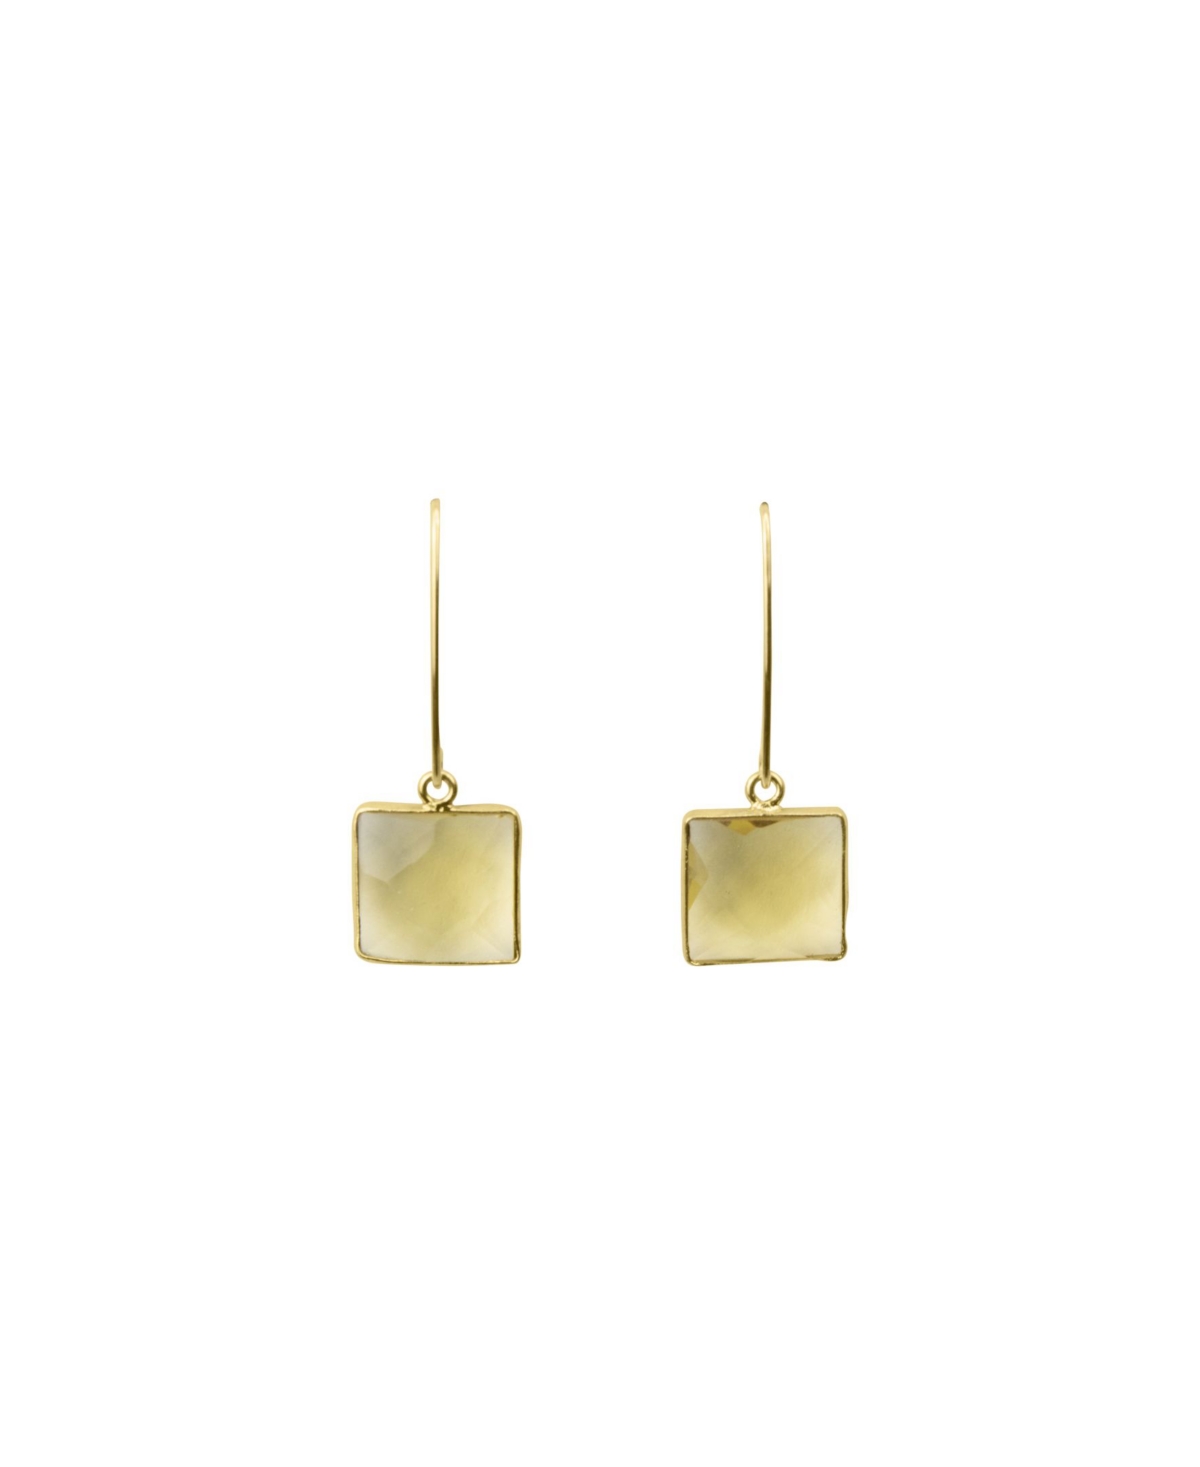 ROBERTA SHER DESIGNS CITRINE STONE DROP EARRINGS WITH 14K GOLD FILLED ARTESIAN EARWIRES